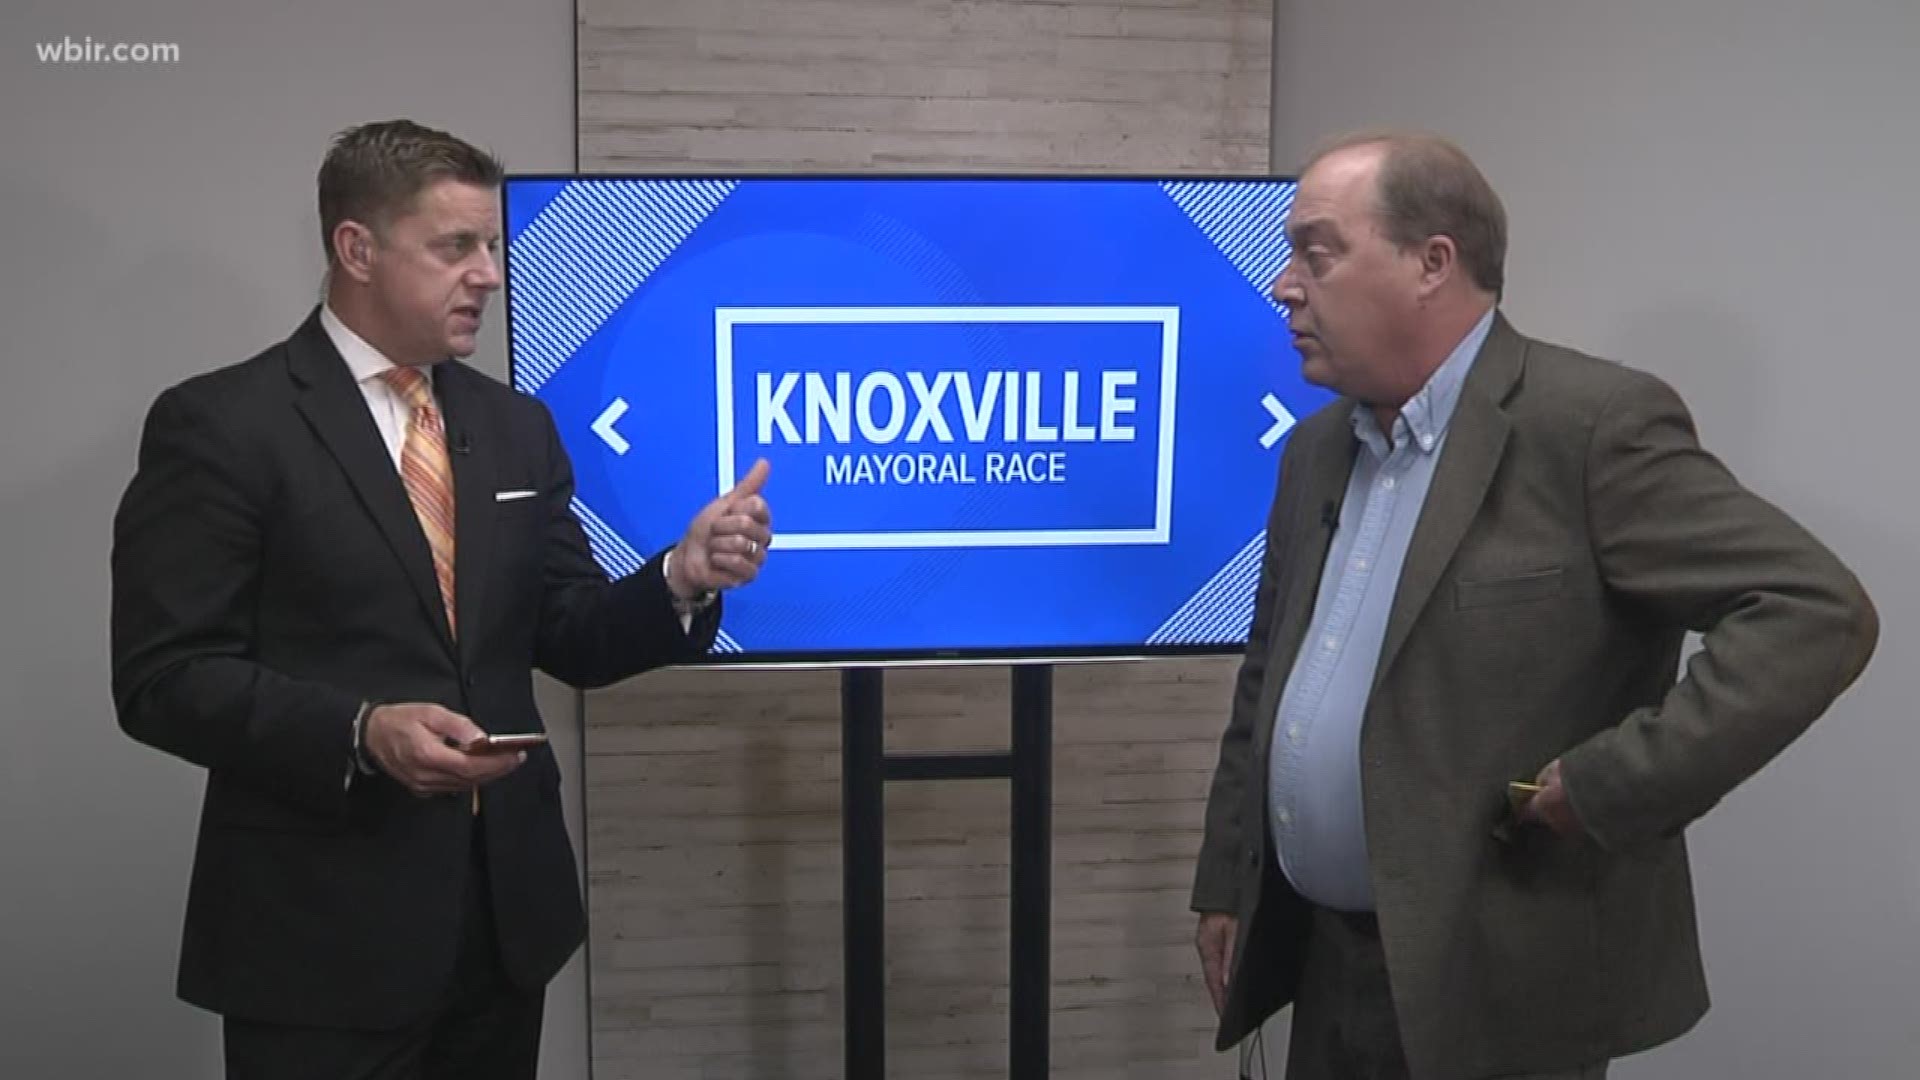 Breaking down the Knoxville mayoral race